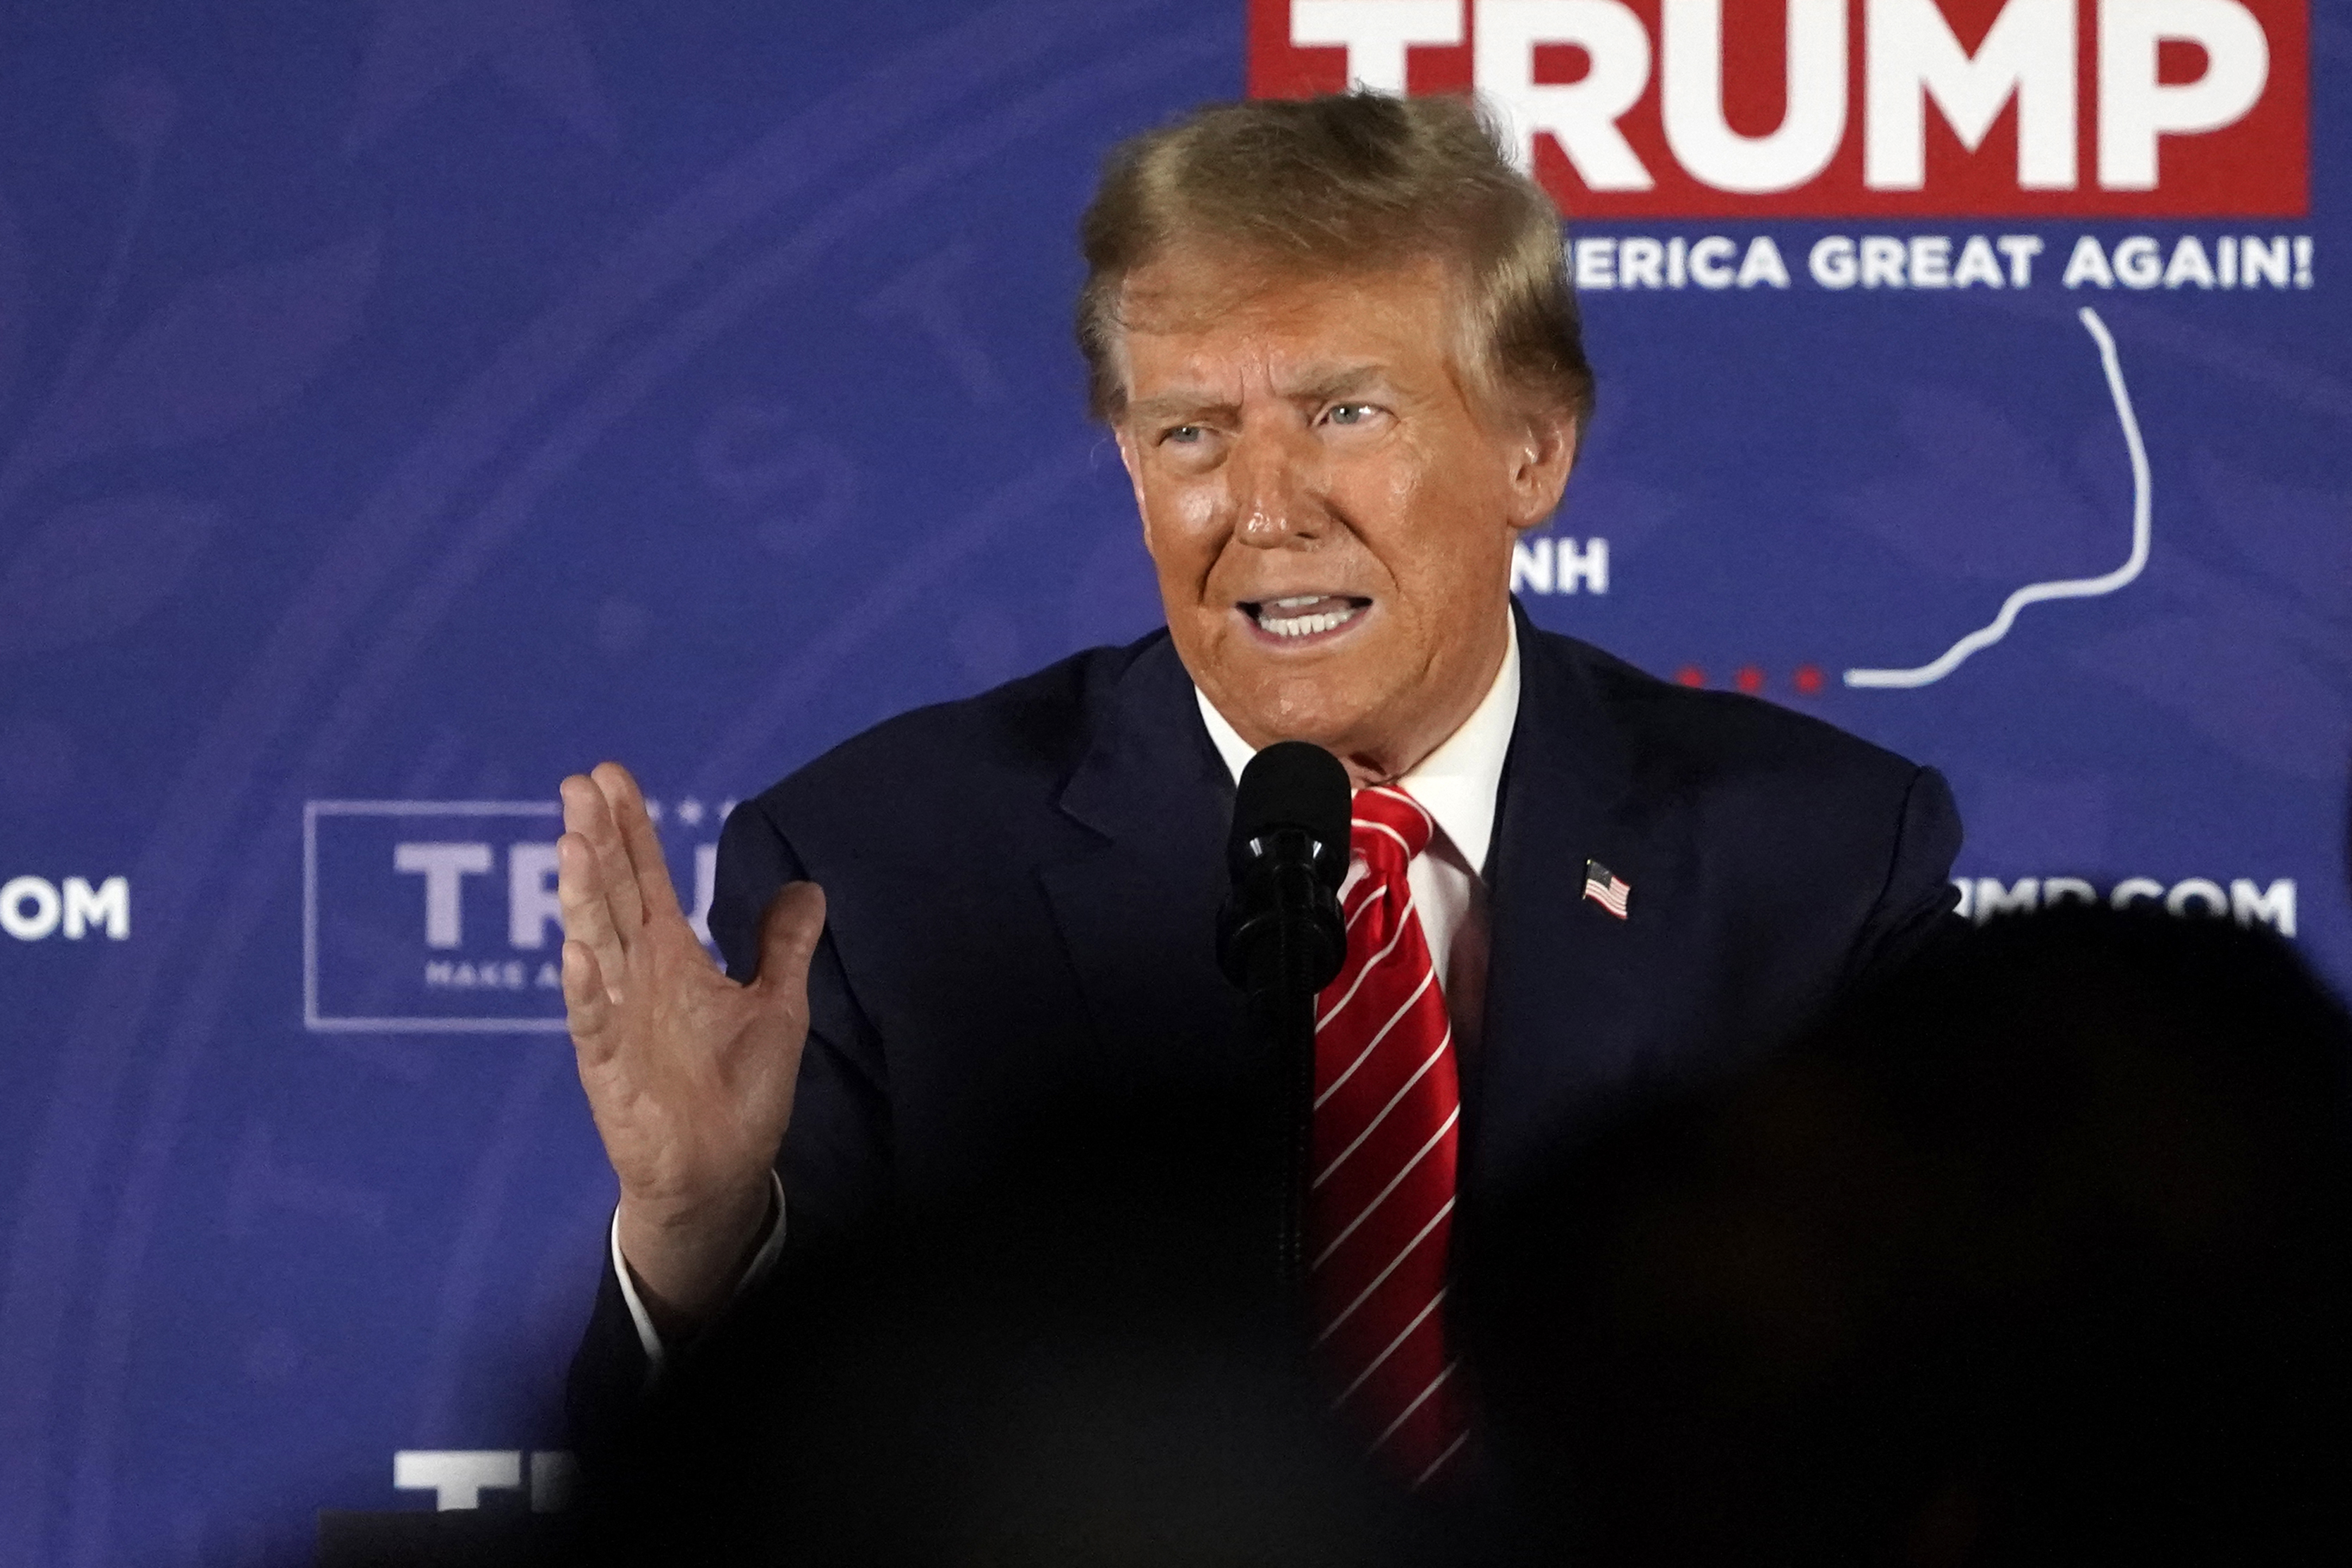 Trump puts out his right hand emphatically as he speaks during a rally on Monday in New Hampshire.